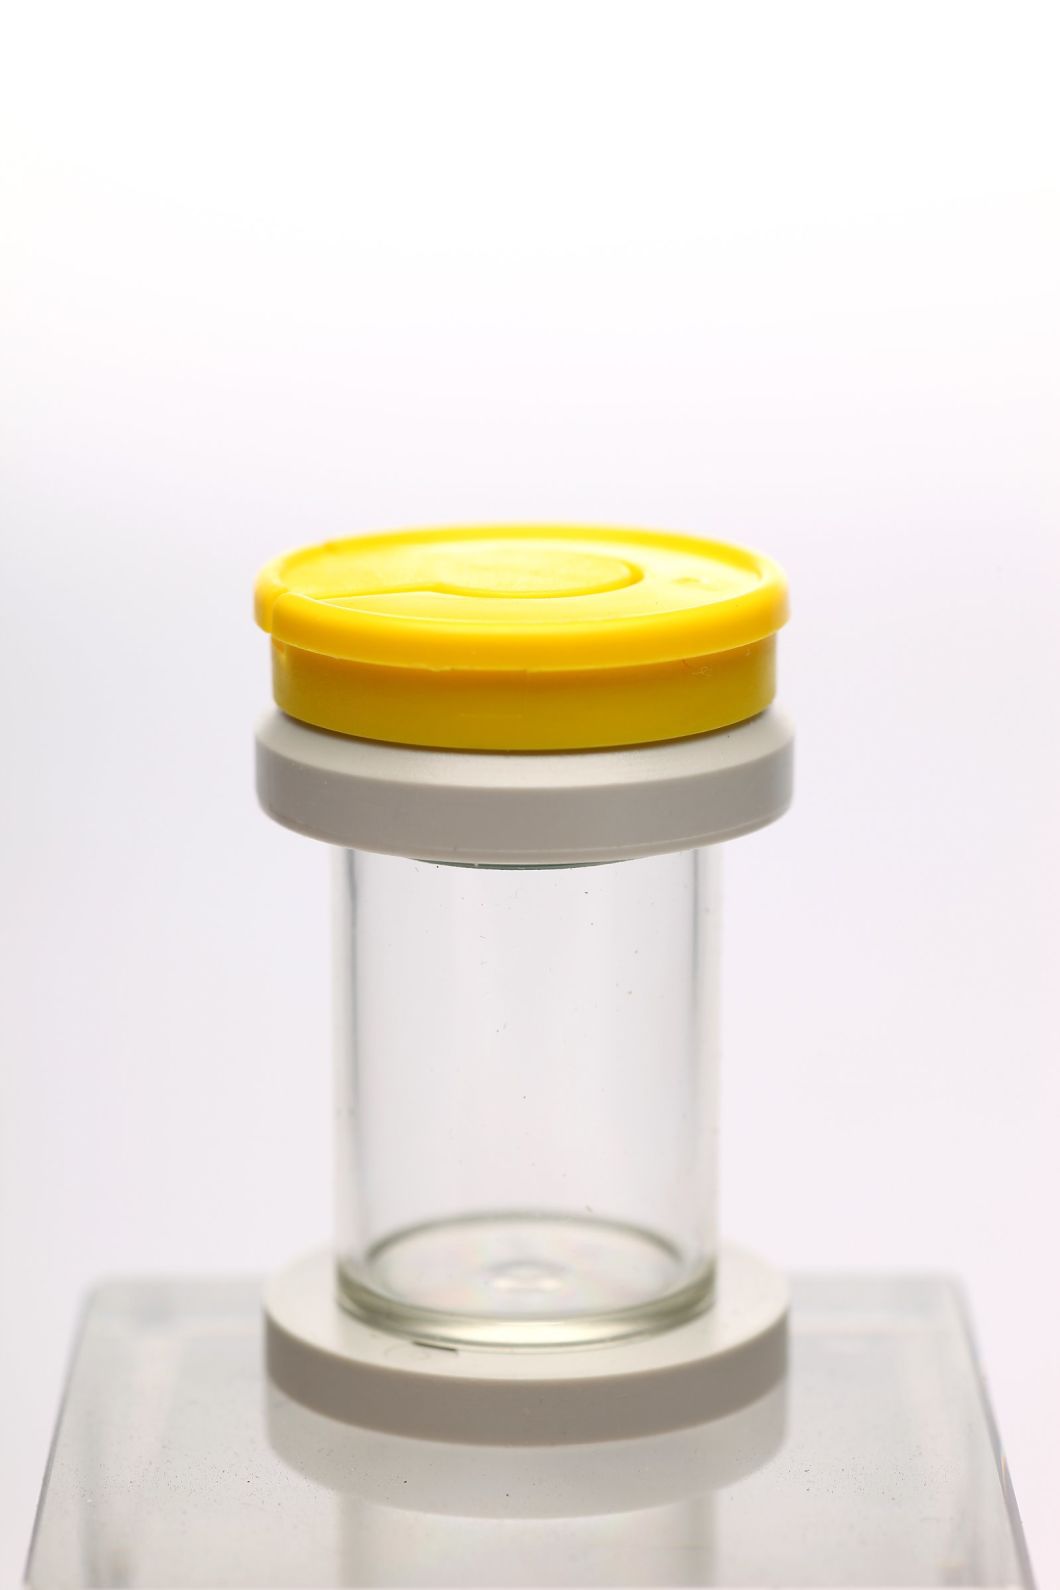 Yellow Cap Specimen Container, Sterile and Disposable